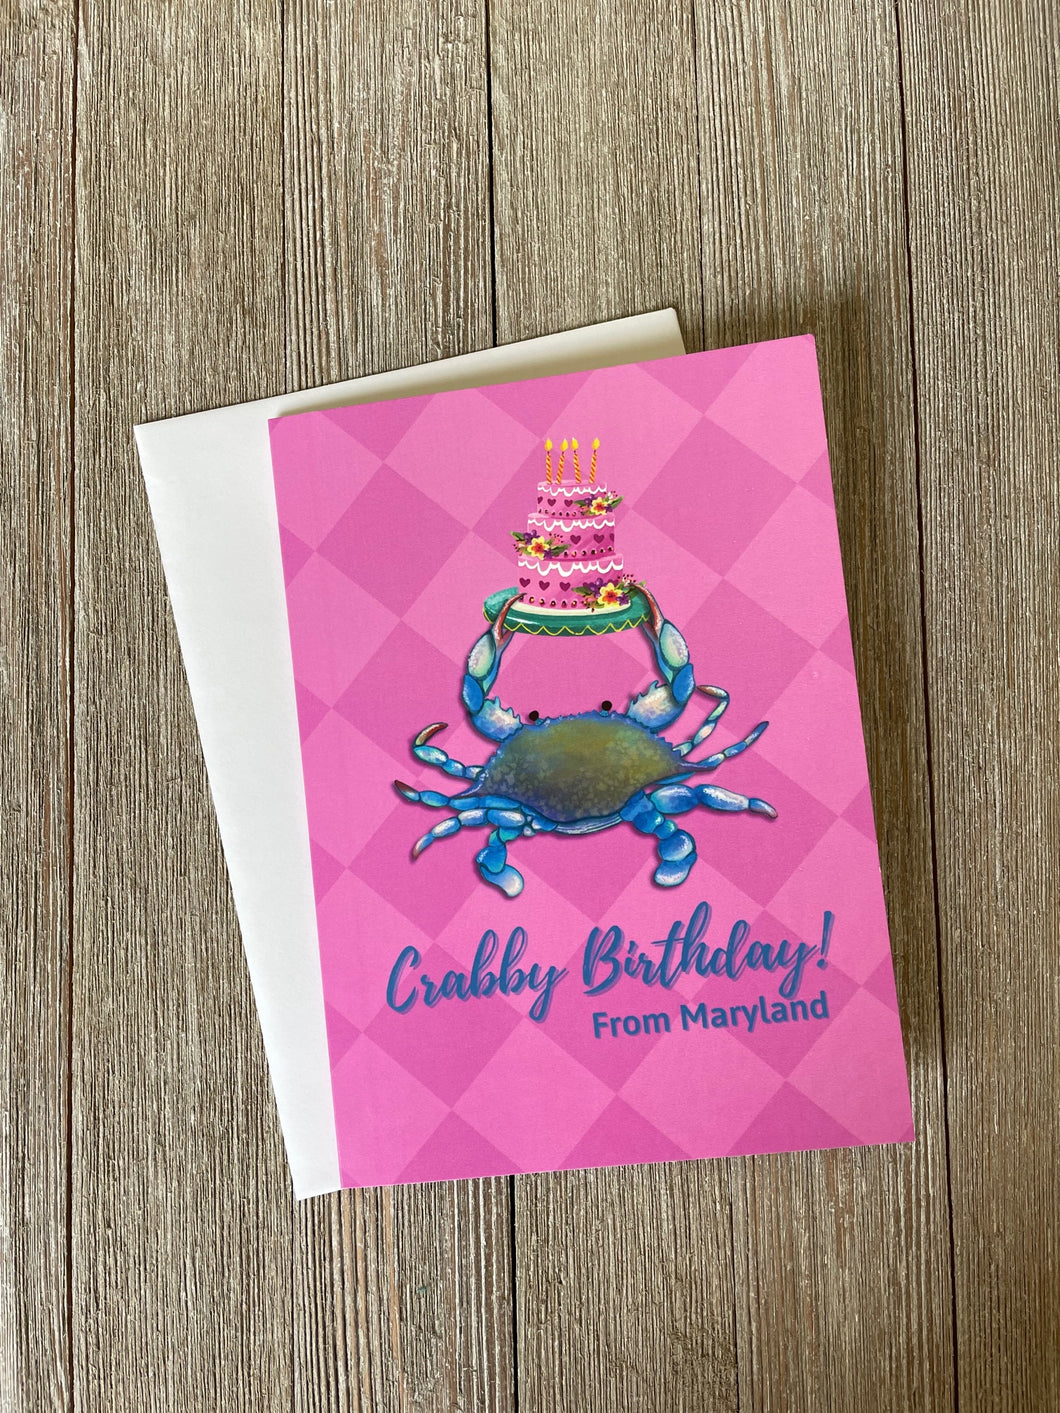 Crabby Birthday From Maryland Card - Blue Crab Holding a Birthday Cake